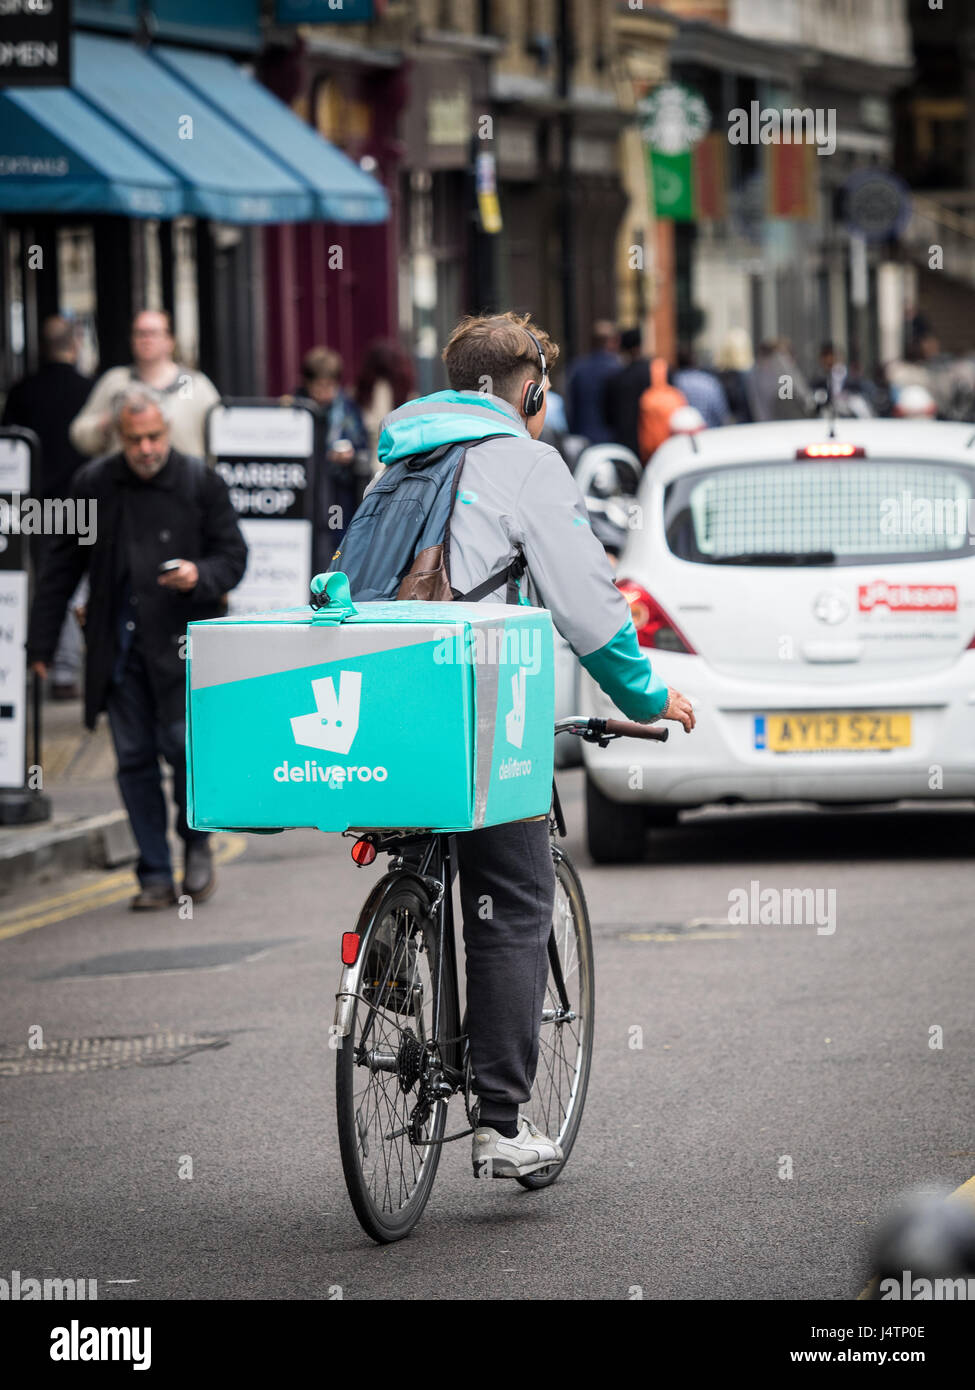 A Deliveroo food delivery courier rides through the streets of Soho in central London Stock Photo